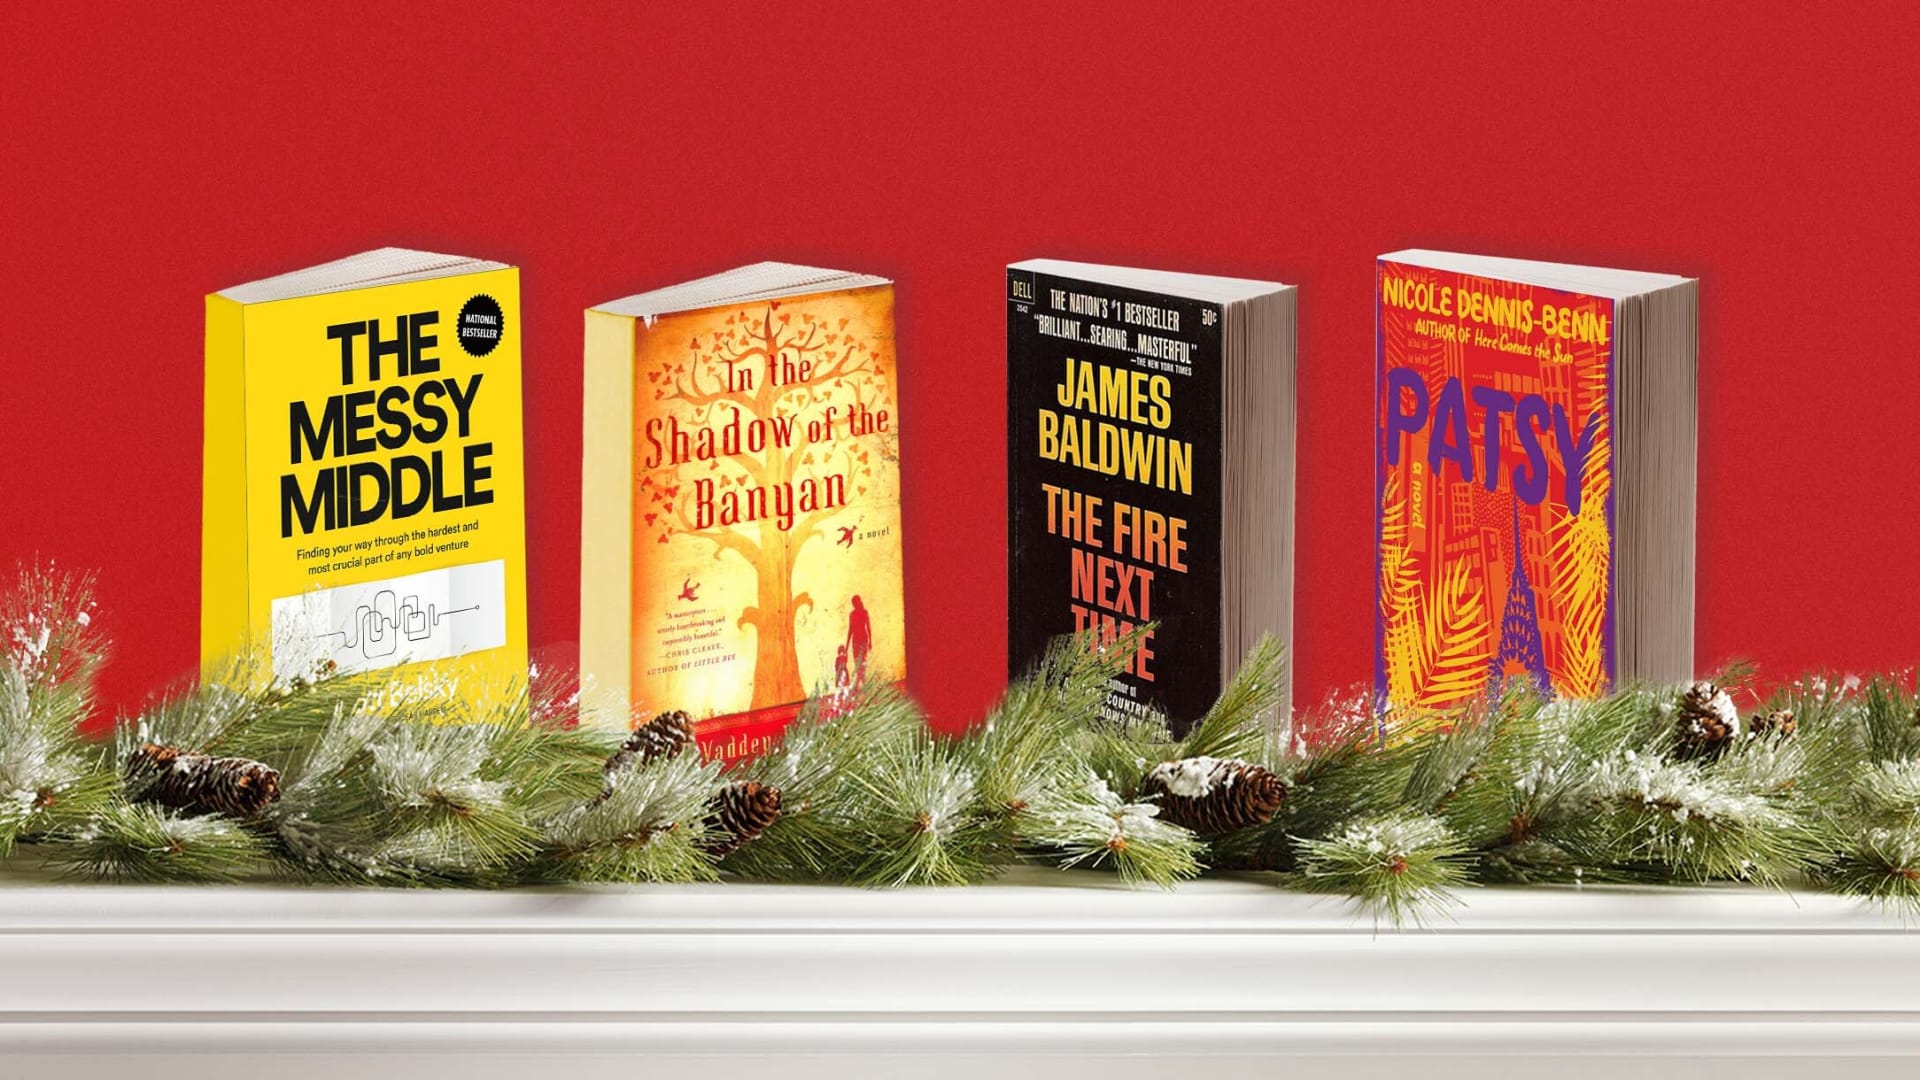 23 Books for Inspiring Holiday Reading, Recommended by TED Speakers